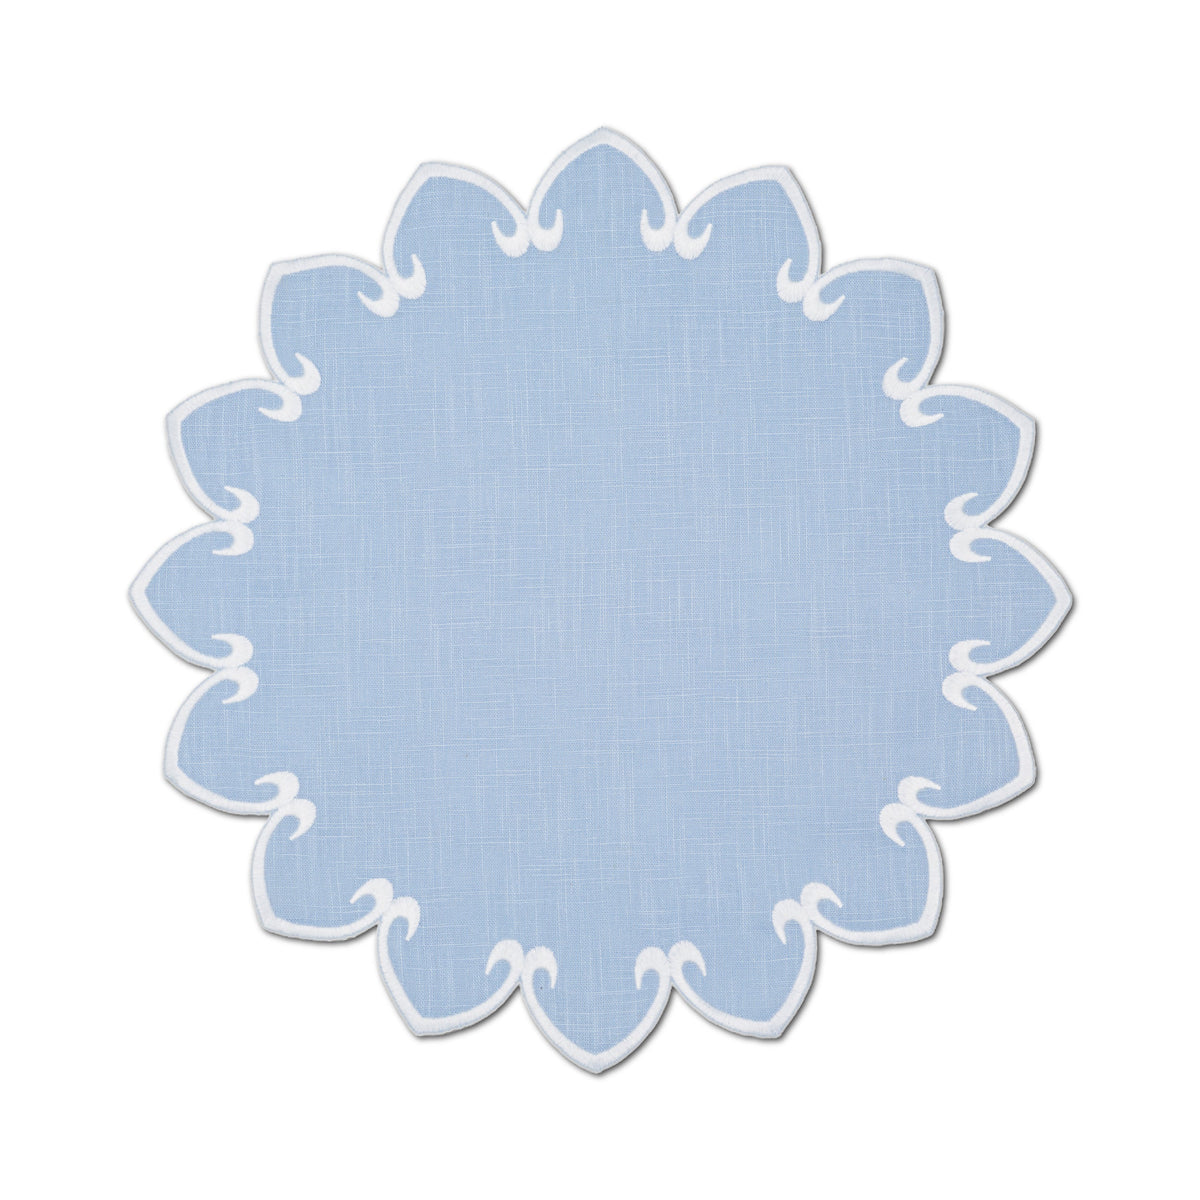 Dahlia Placemat in Light Blue, Set of 4